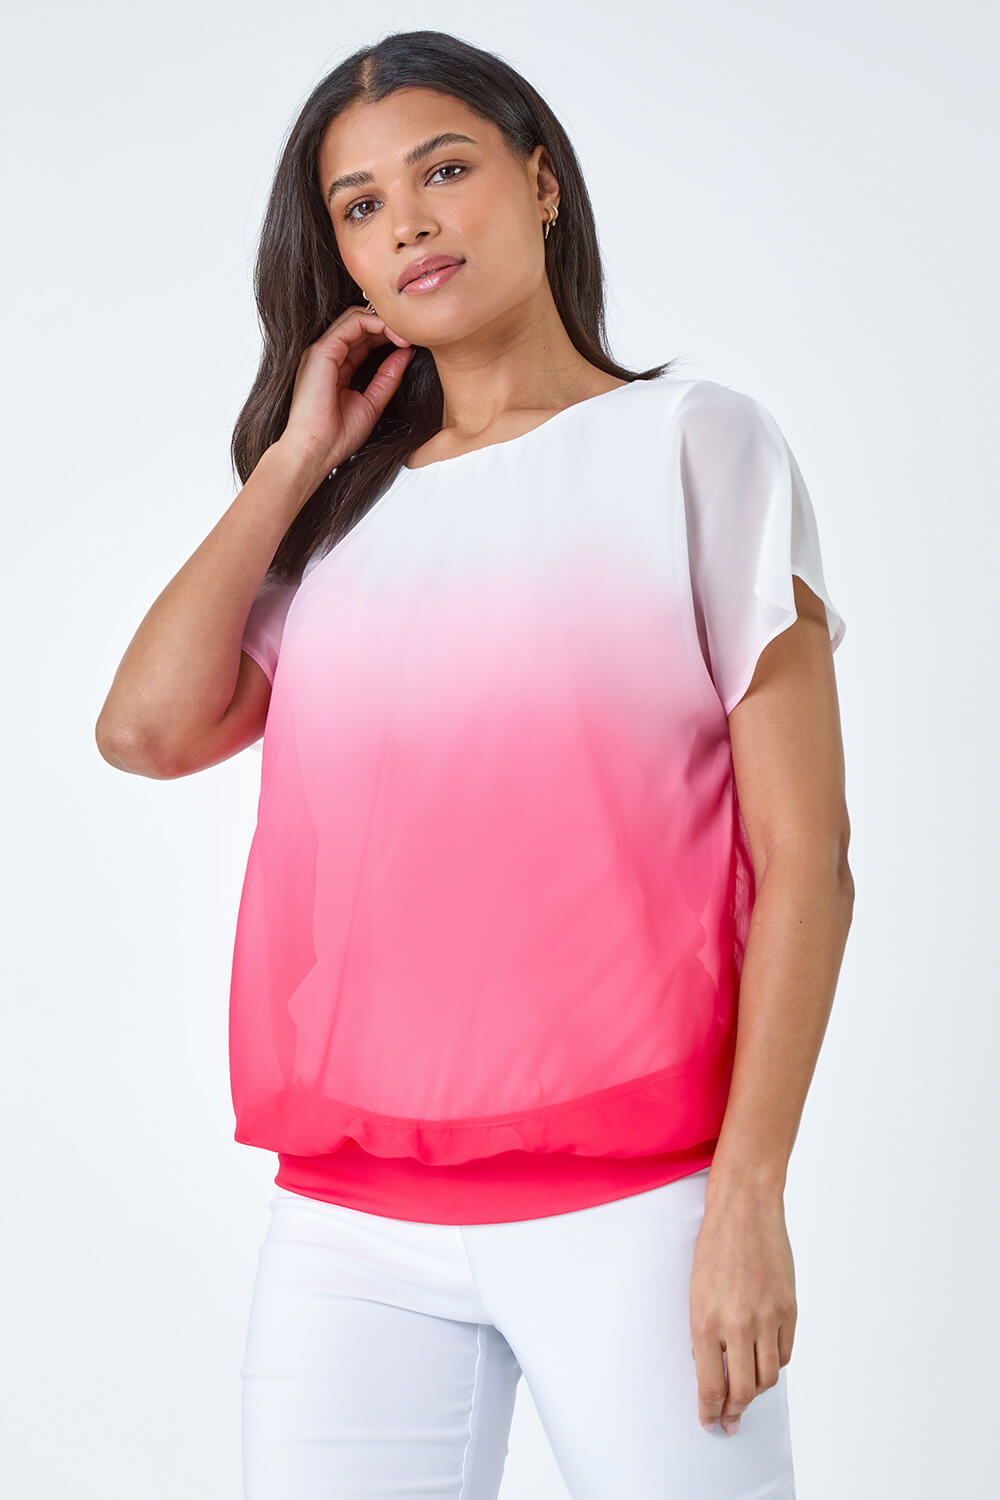 CORAL Ombre Chiffon Overlay Blouson Top, Image 2 of 5